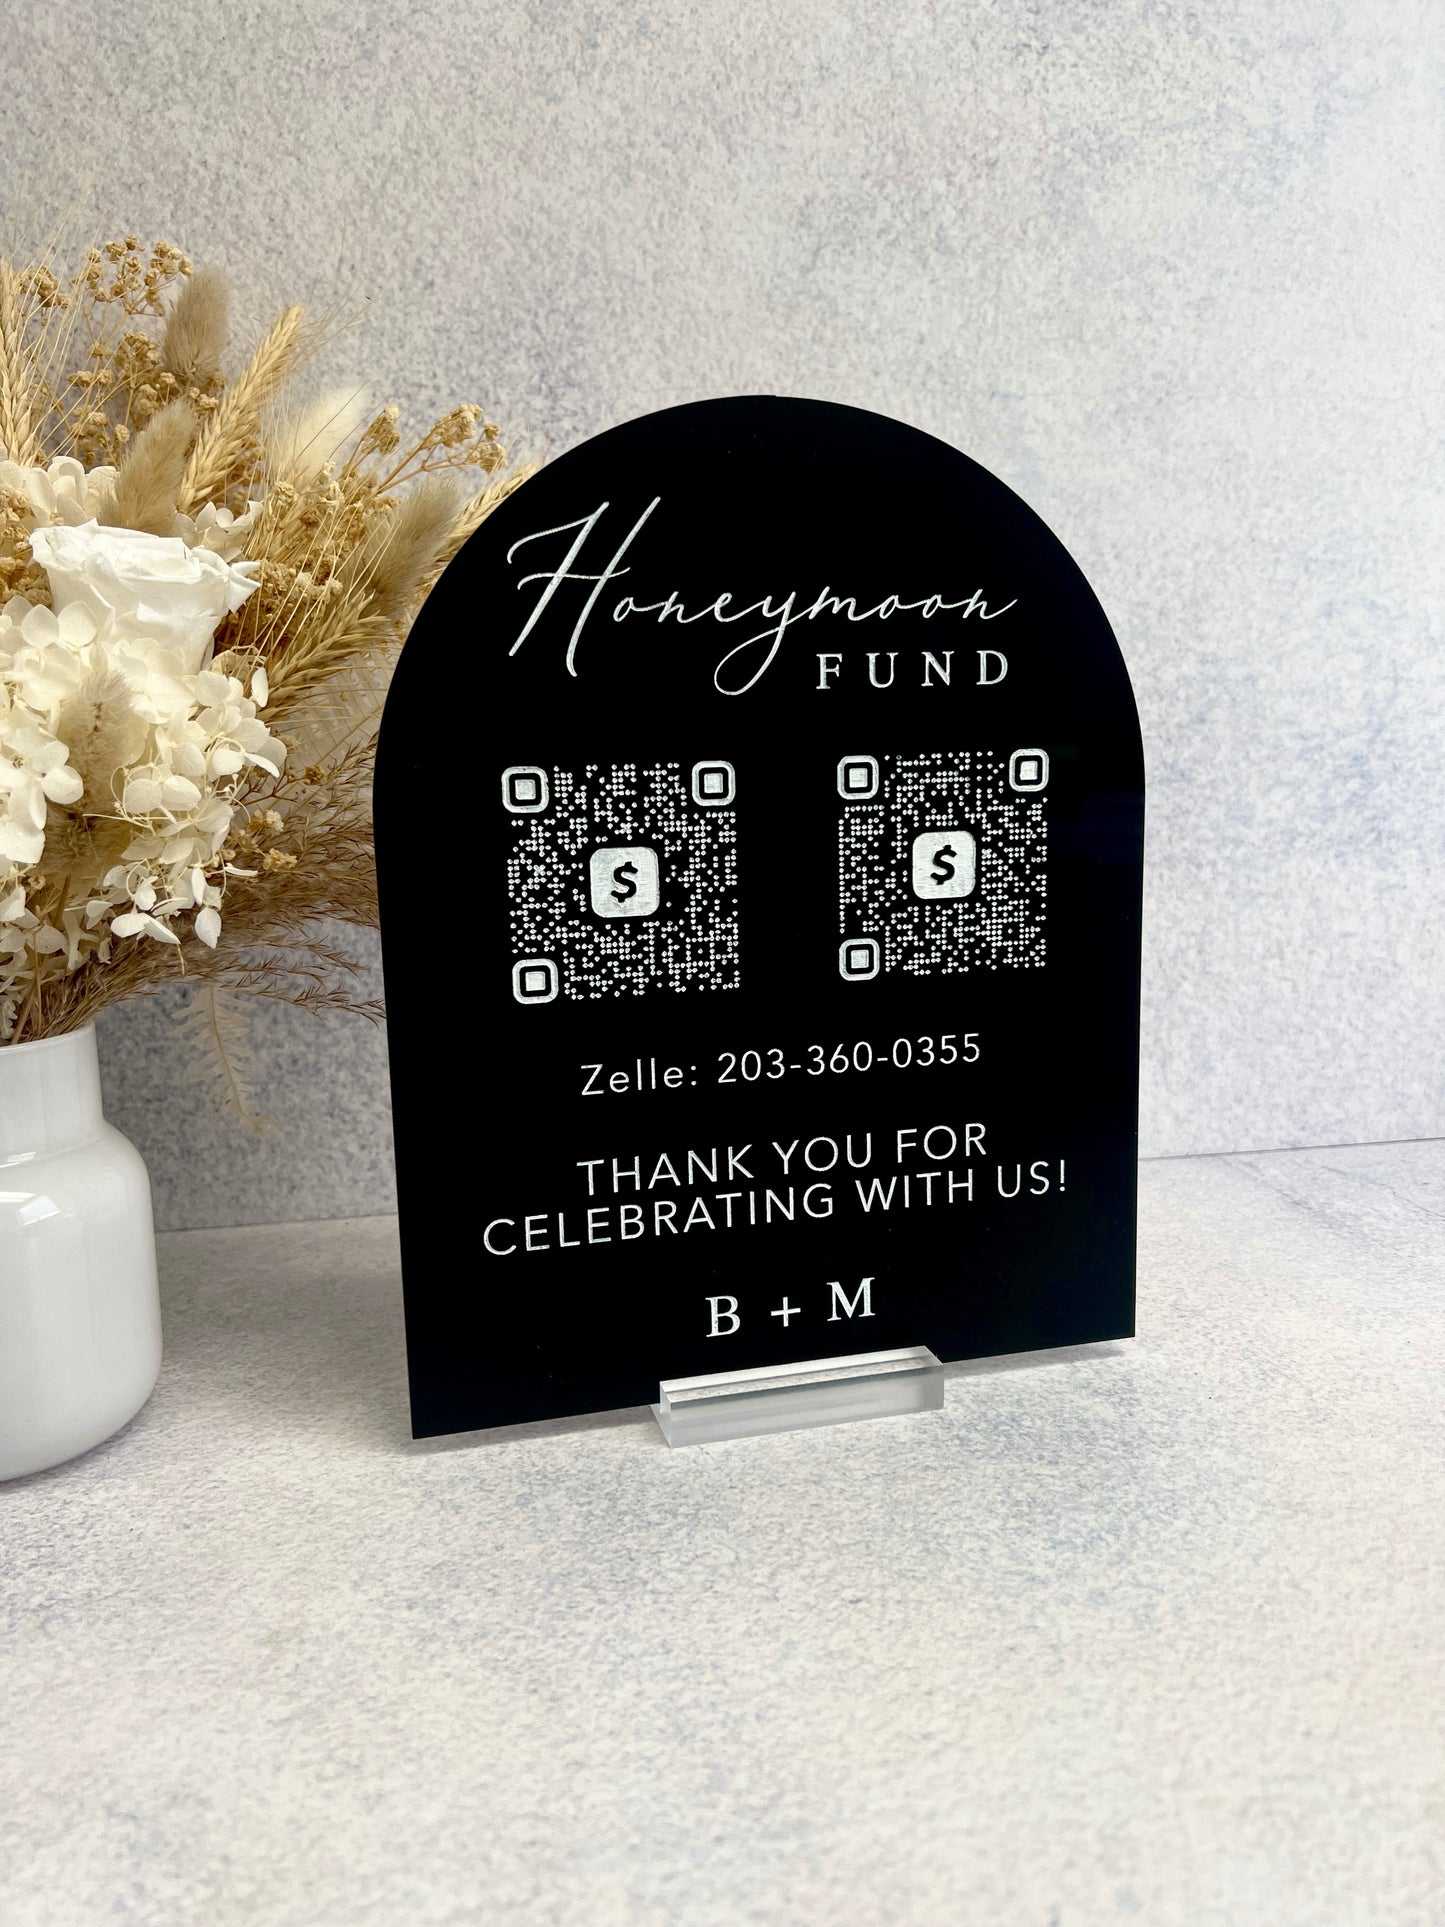 Share the Love: Honeymoon Fund Acrylic Sign with QR codes